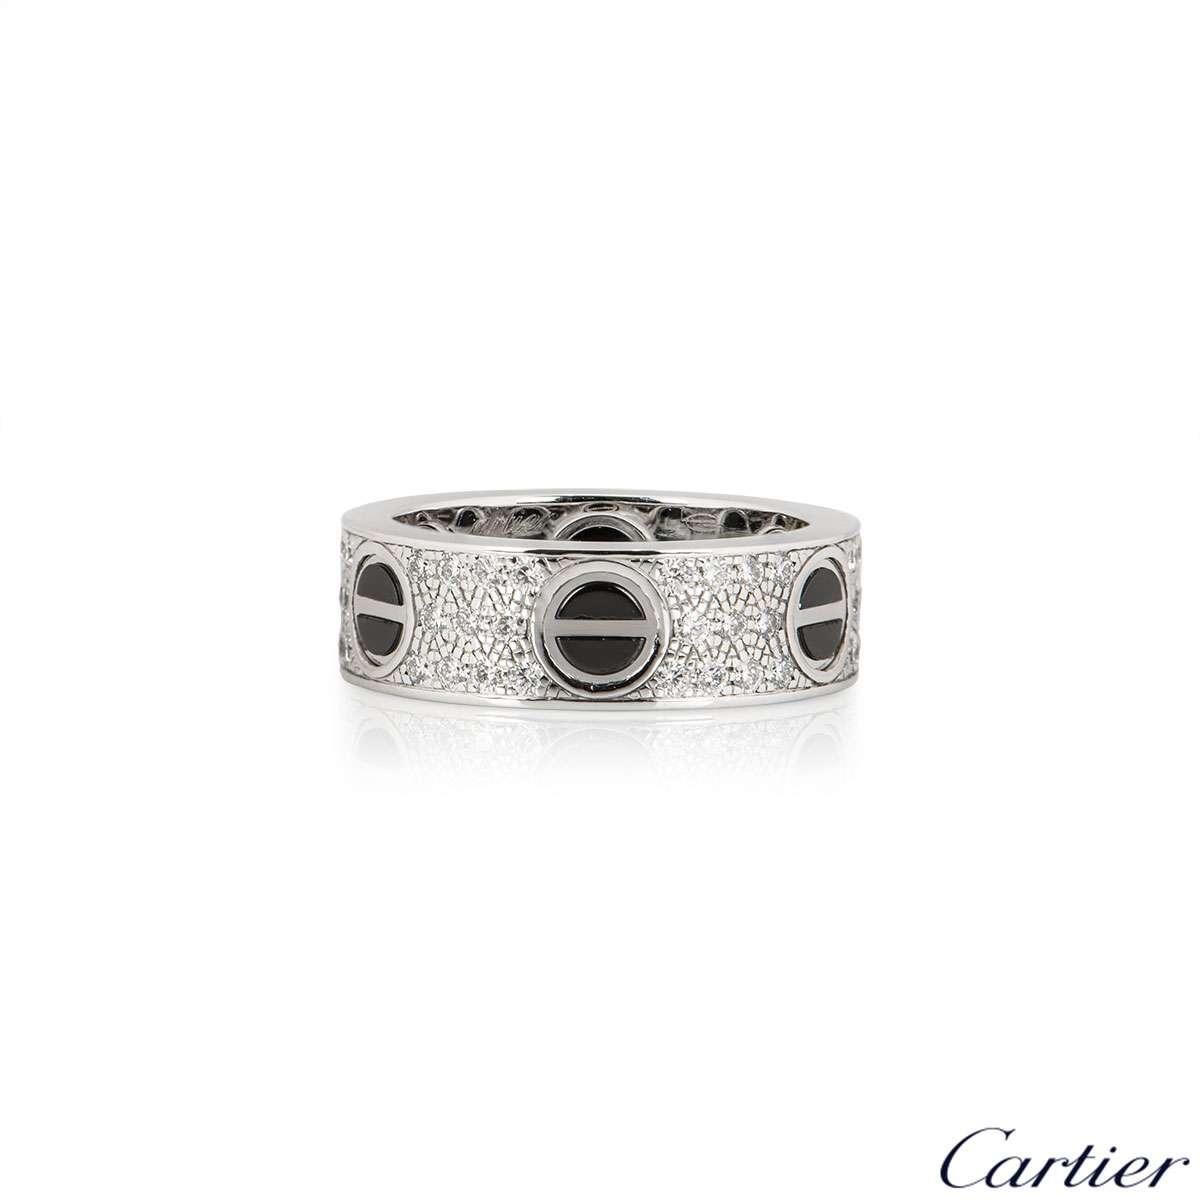 An 18k white gold diamond set Love ring by Cartier. The ring features the classic screw motif, featuring a ceramic inlay, around the outer edge and has 66 pave set, round brilliant cut diamonds set between each screw, totalling 0.74ct. The 6mm wide